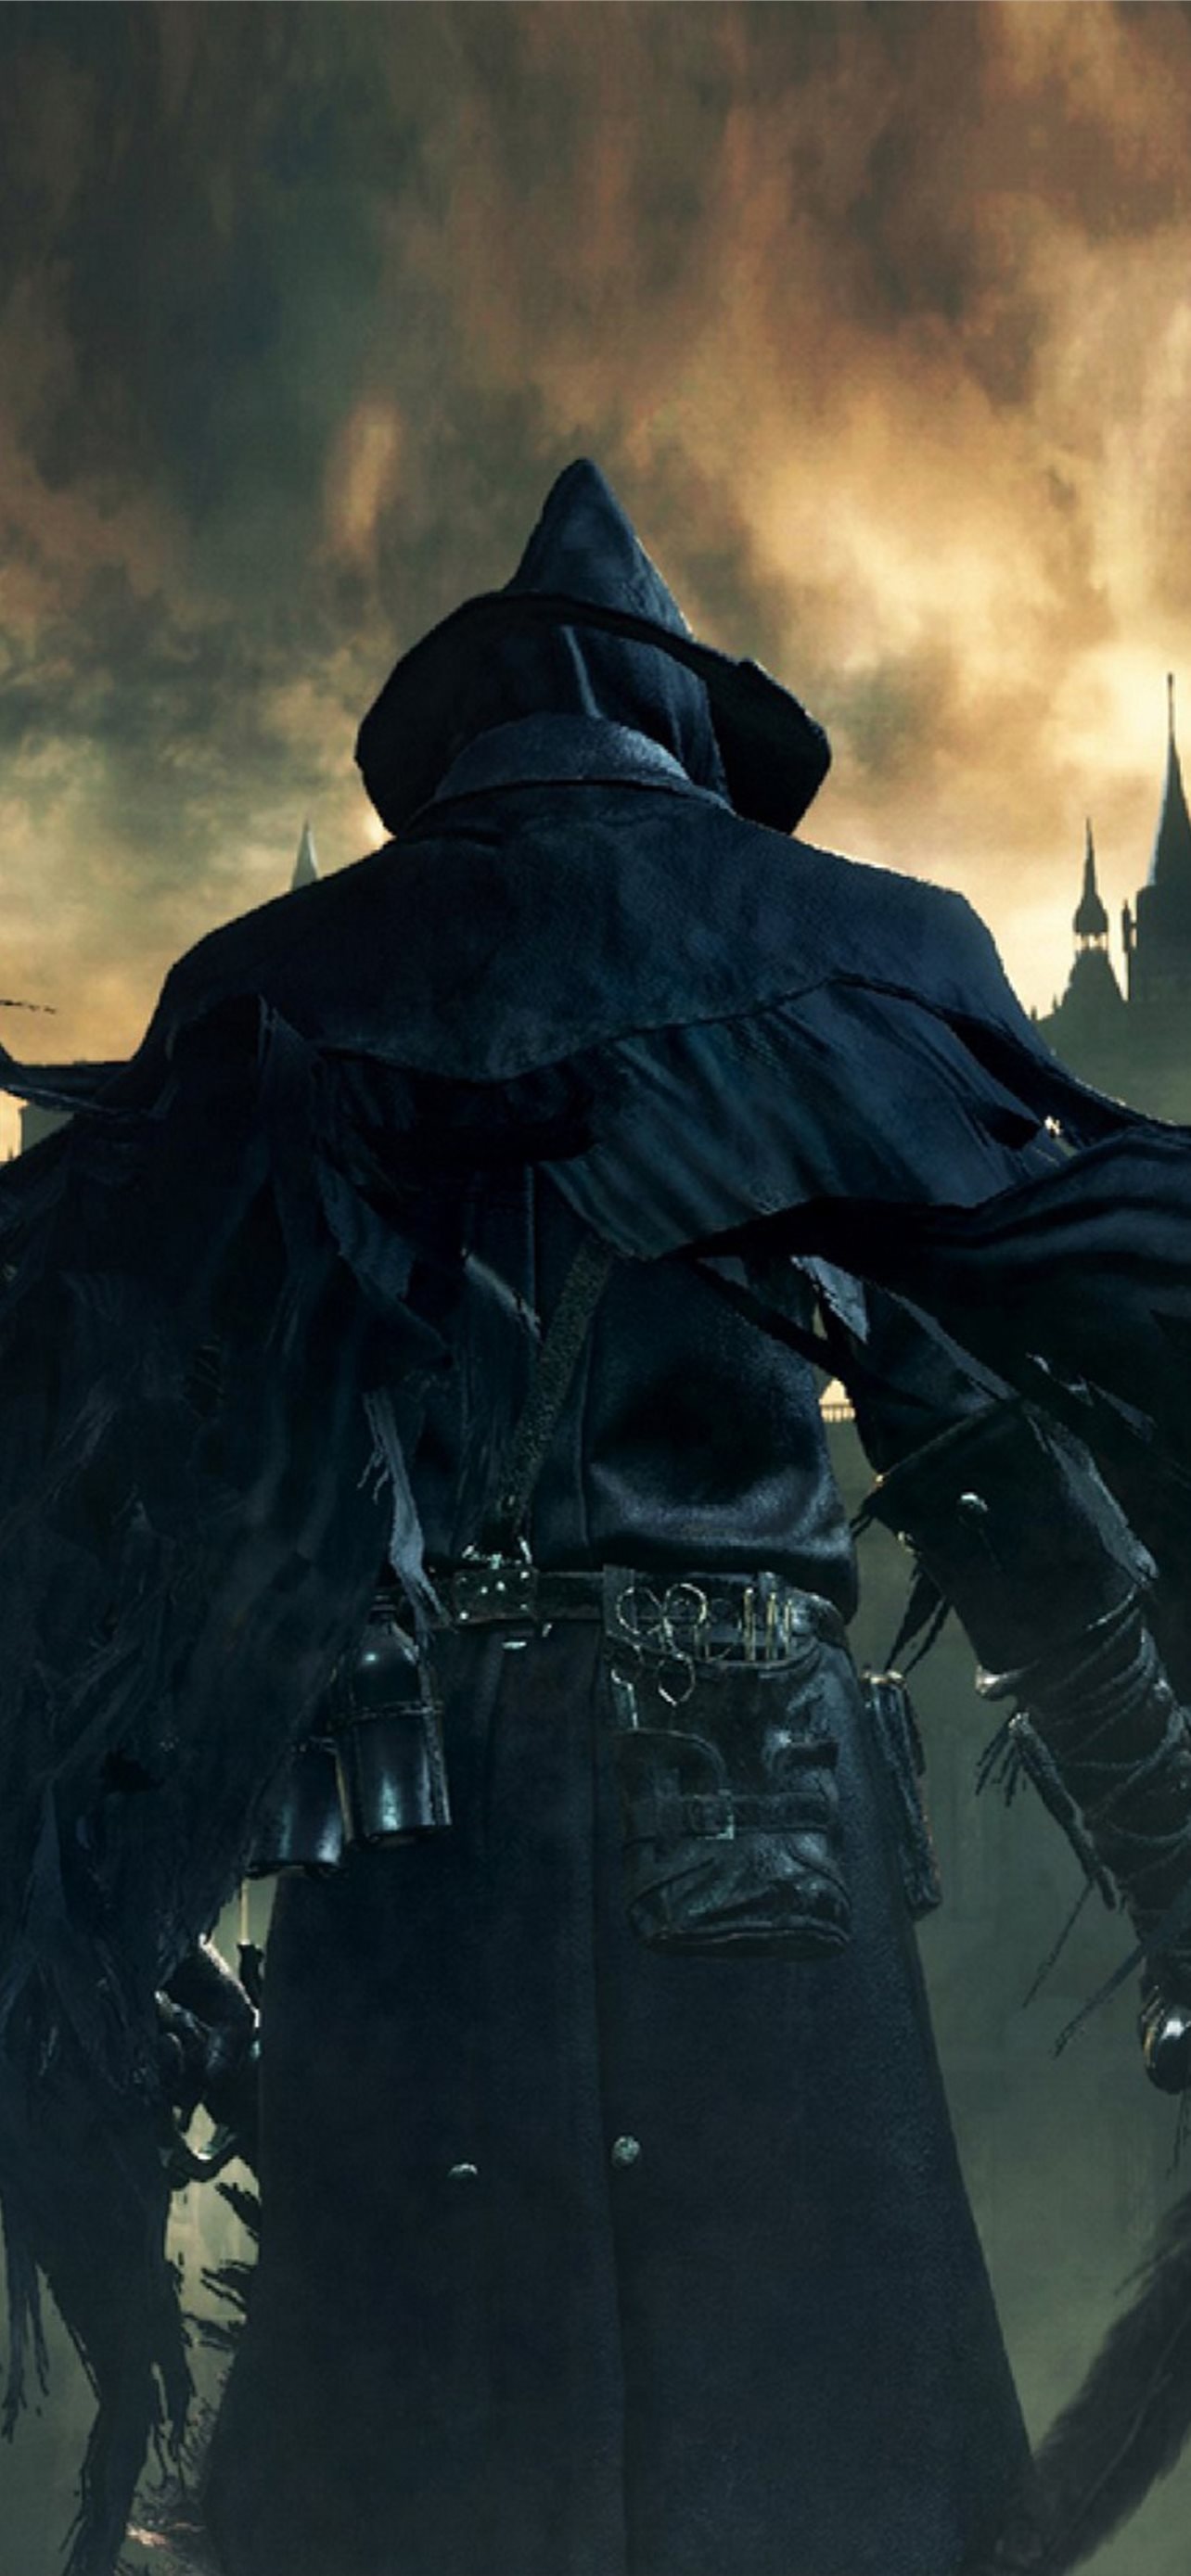 Bloodborne Video Game 4K Ultra HD Mobile iPhone Wallpapers Free Download